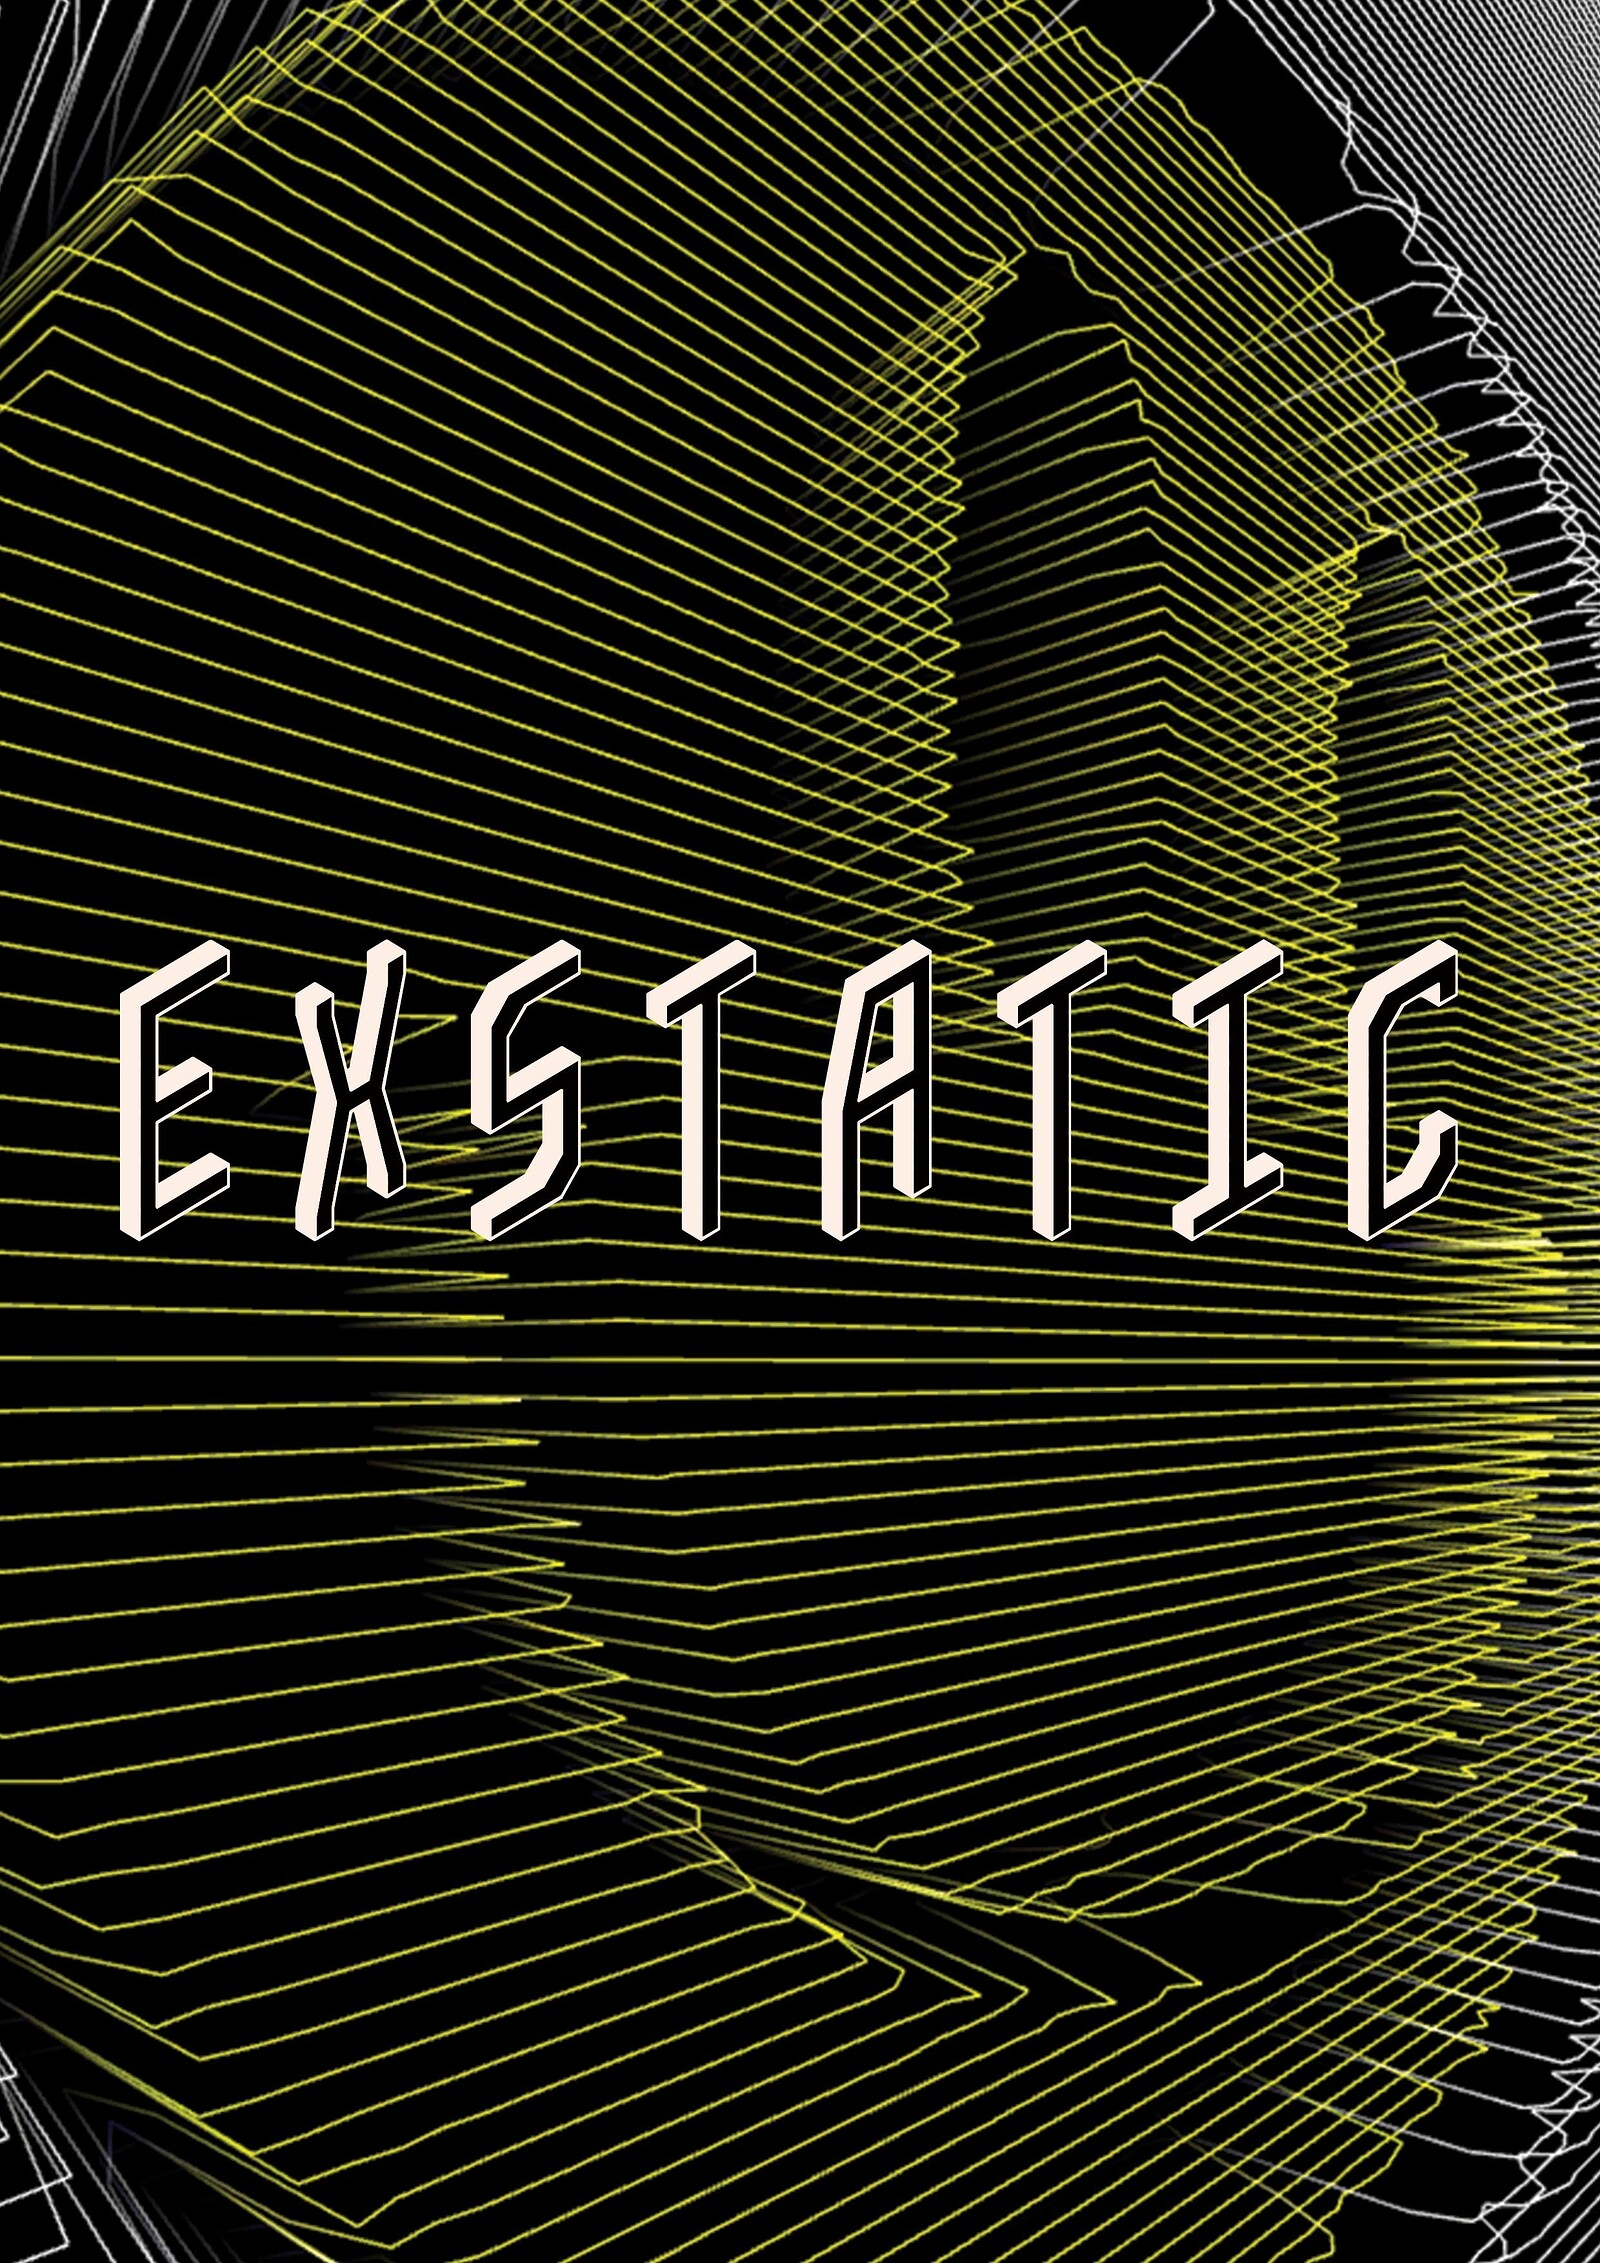 Exstatic - Fracture, FFF + More at The Island